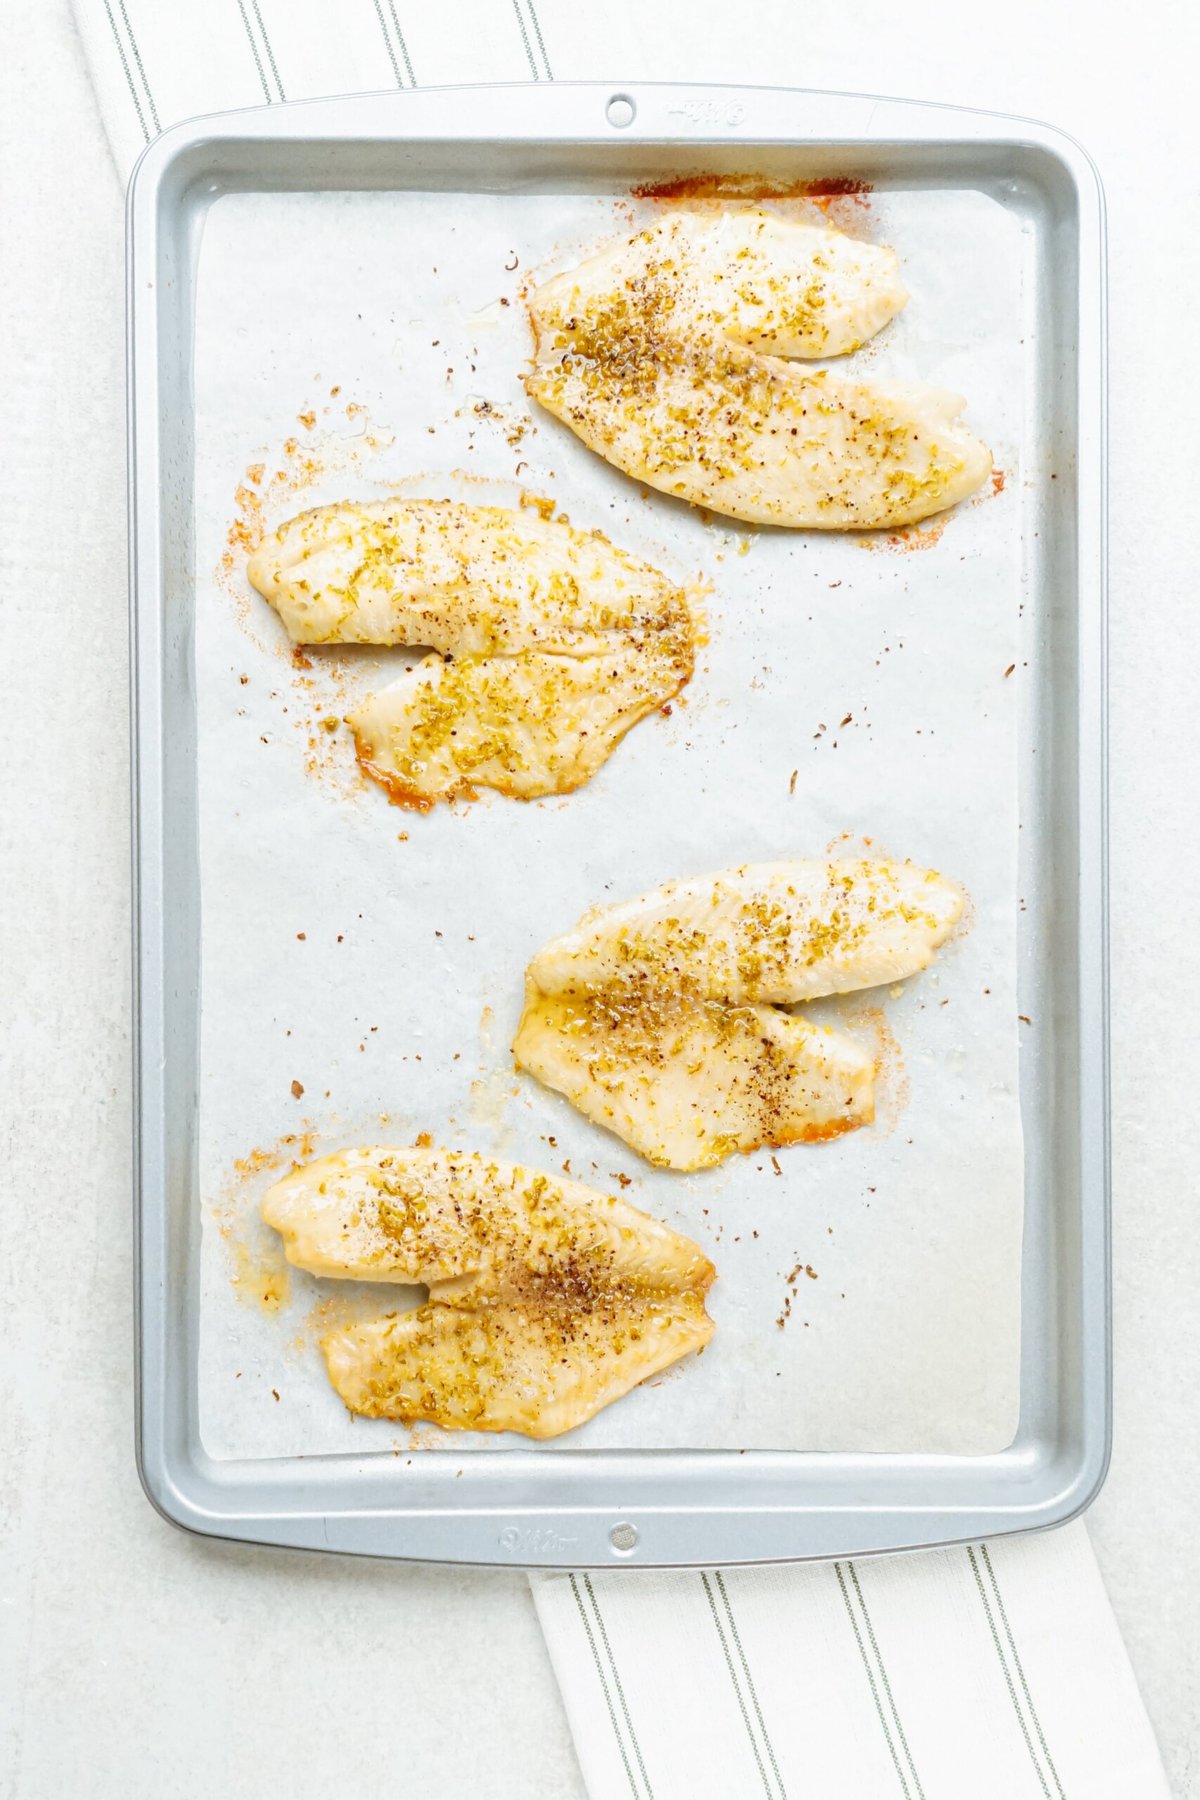 Marinated fish seasoned with spices on a baking tray lined with parchment paper for tacos.